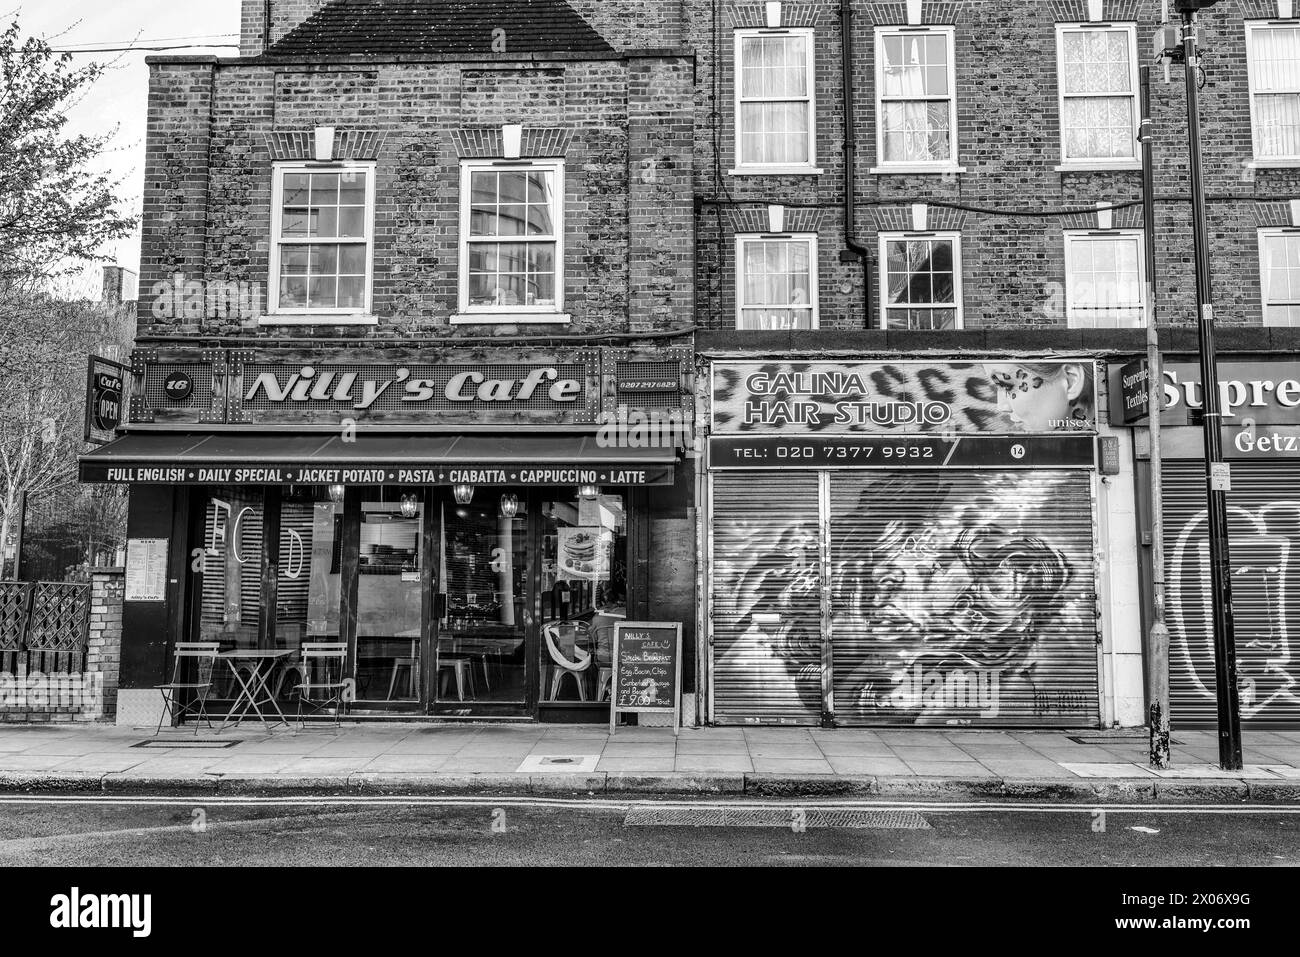 Cafe and shops in Bell Lane, Spitalfields East End area of Tower Hamlets, London Stock Photo